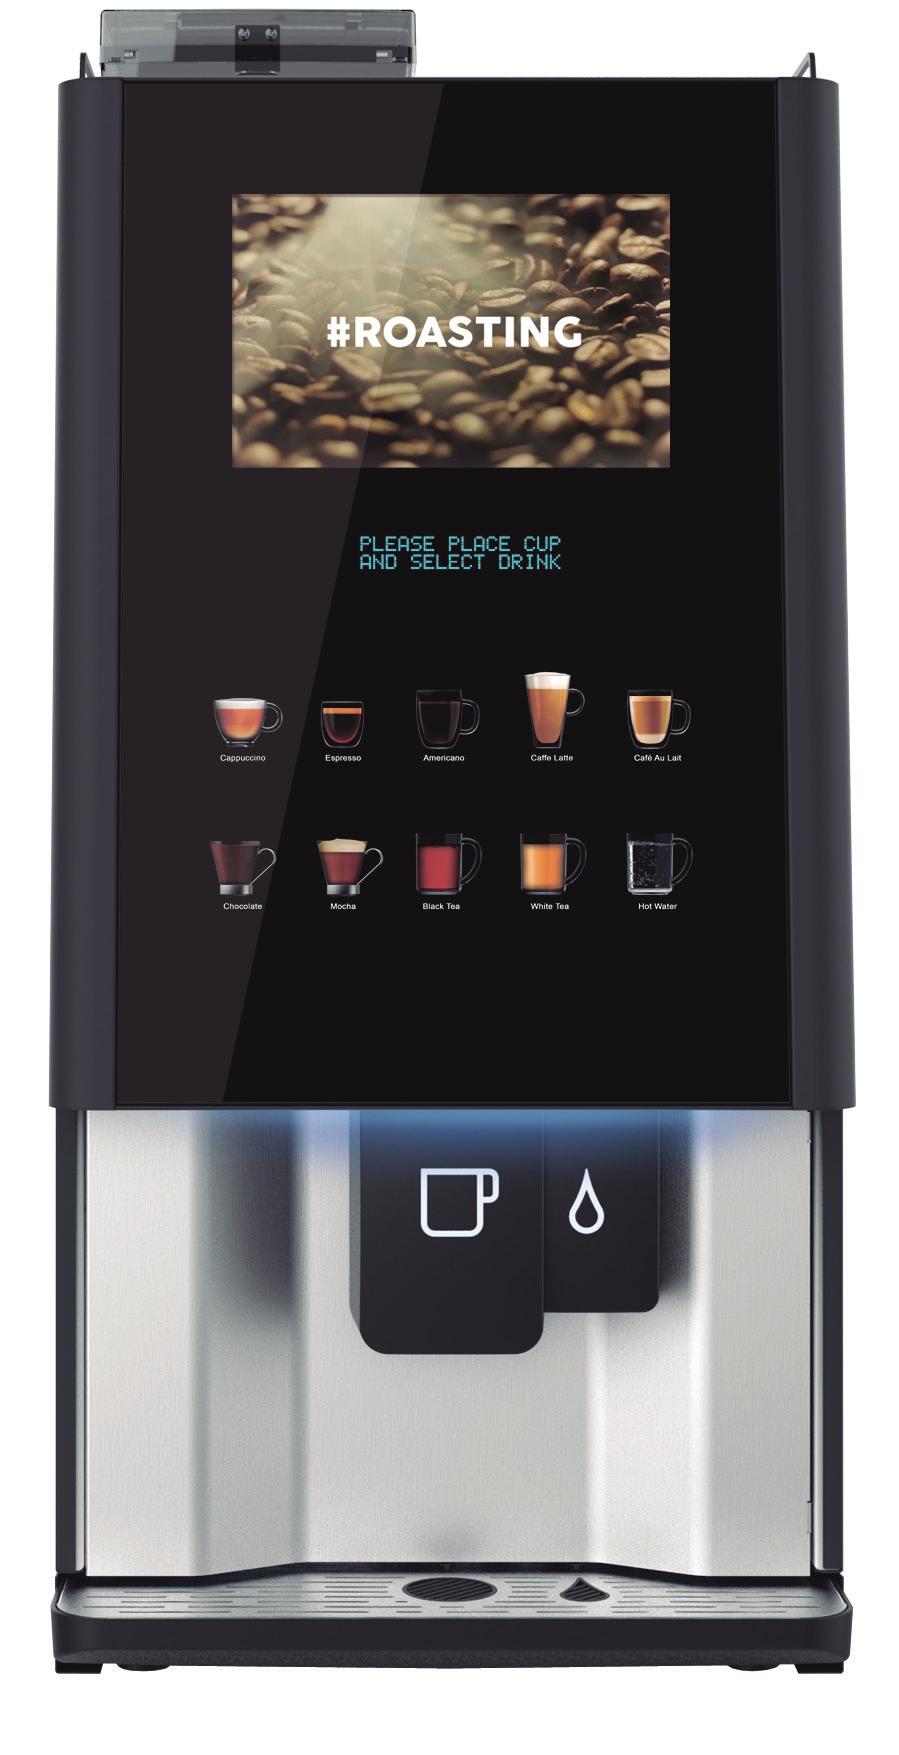 Duo Vitro x4 Duo Provides genuine high pressure espresso coffee, fresh-brew tea, chocolate and milk based drinks. The machine has a large product capacity and there s an optional Media Screen.